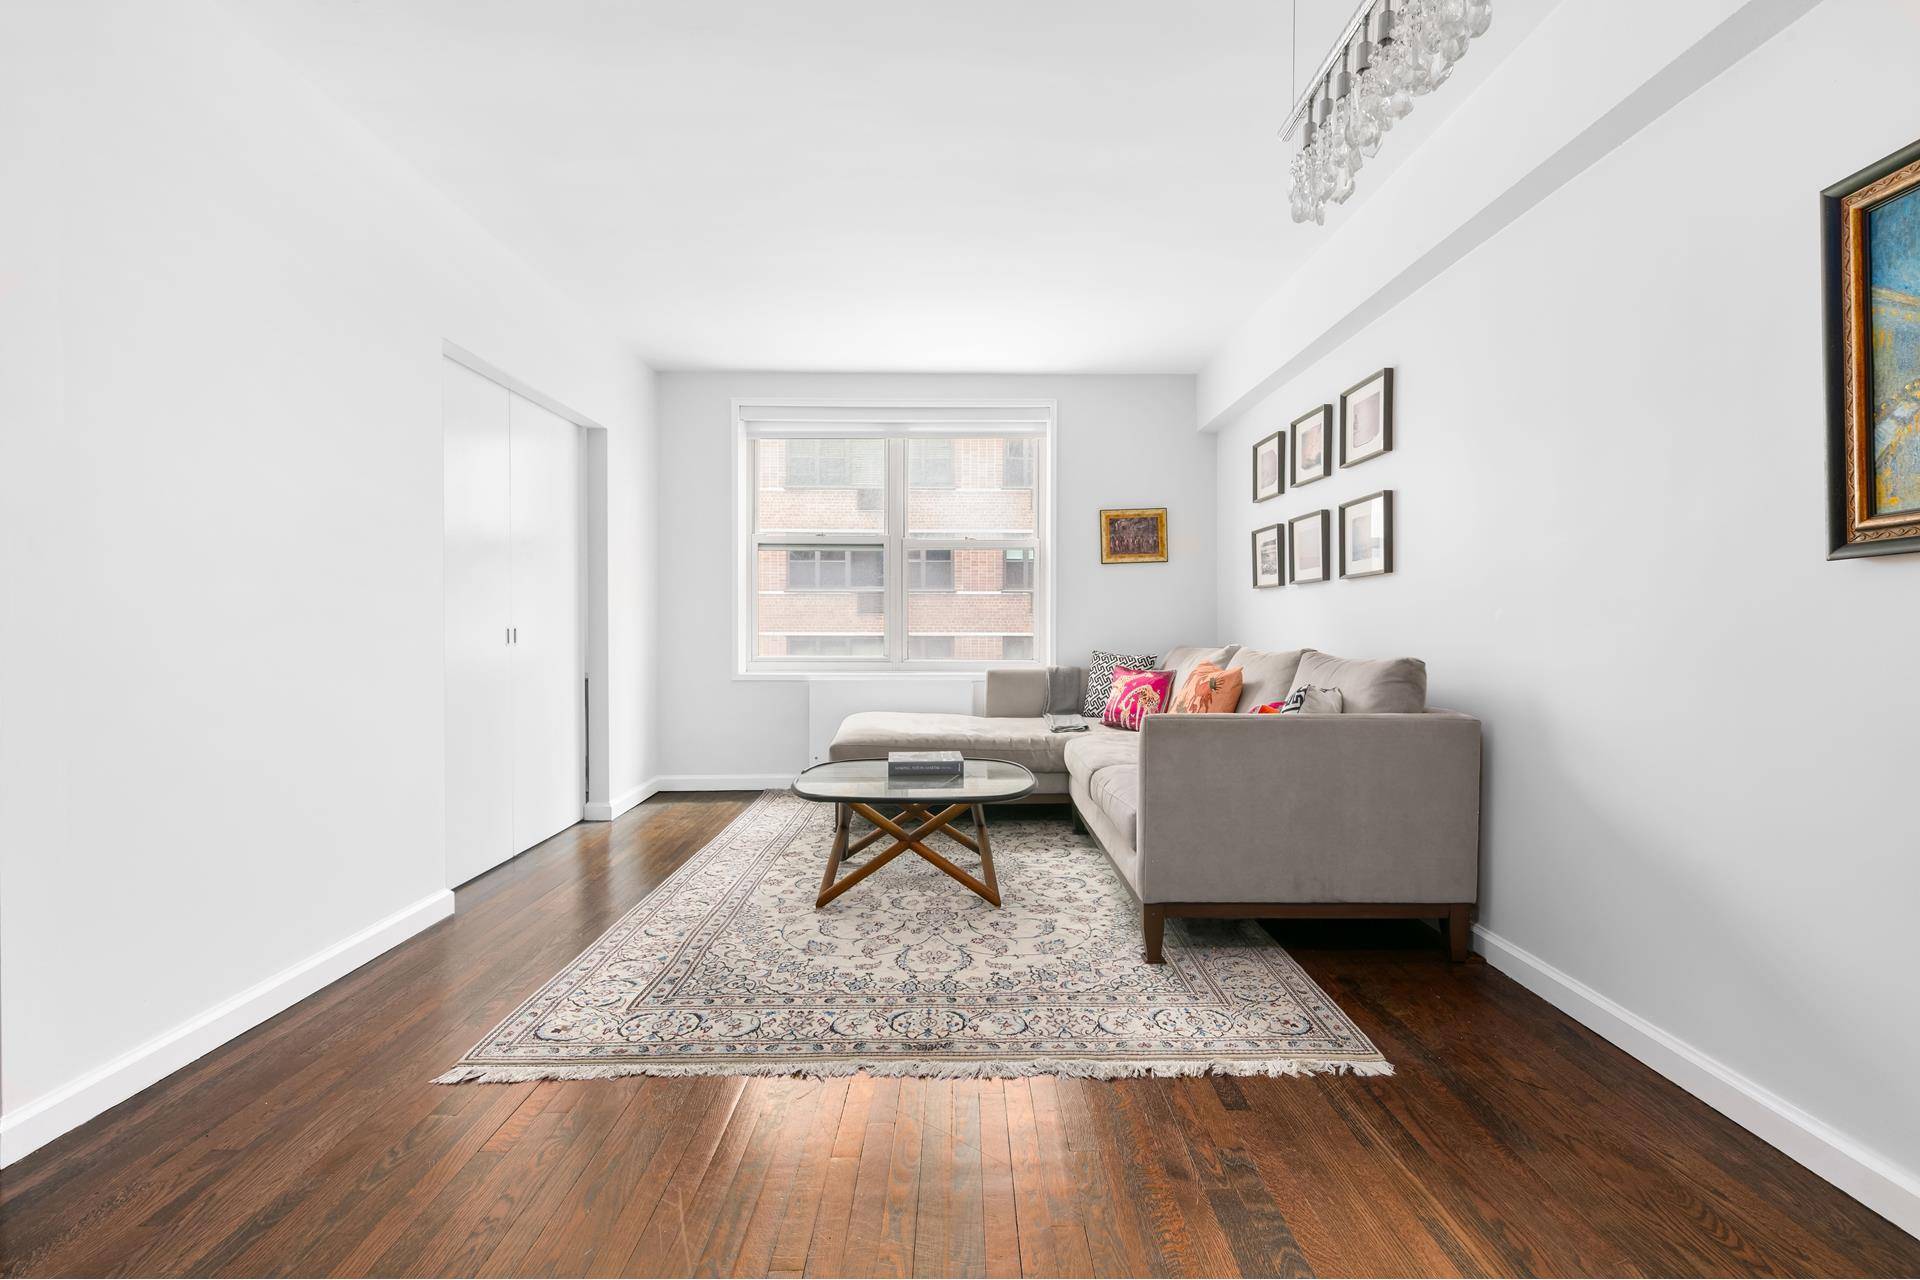 Introducing Residence 329 330 at 60 East 9th Street An exceptional 2 bed, 2 bath unit that holds incredible potential.